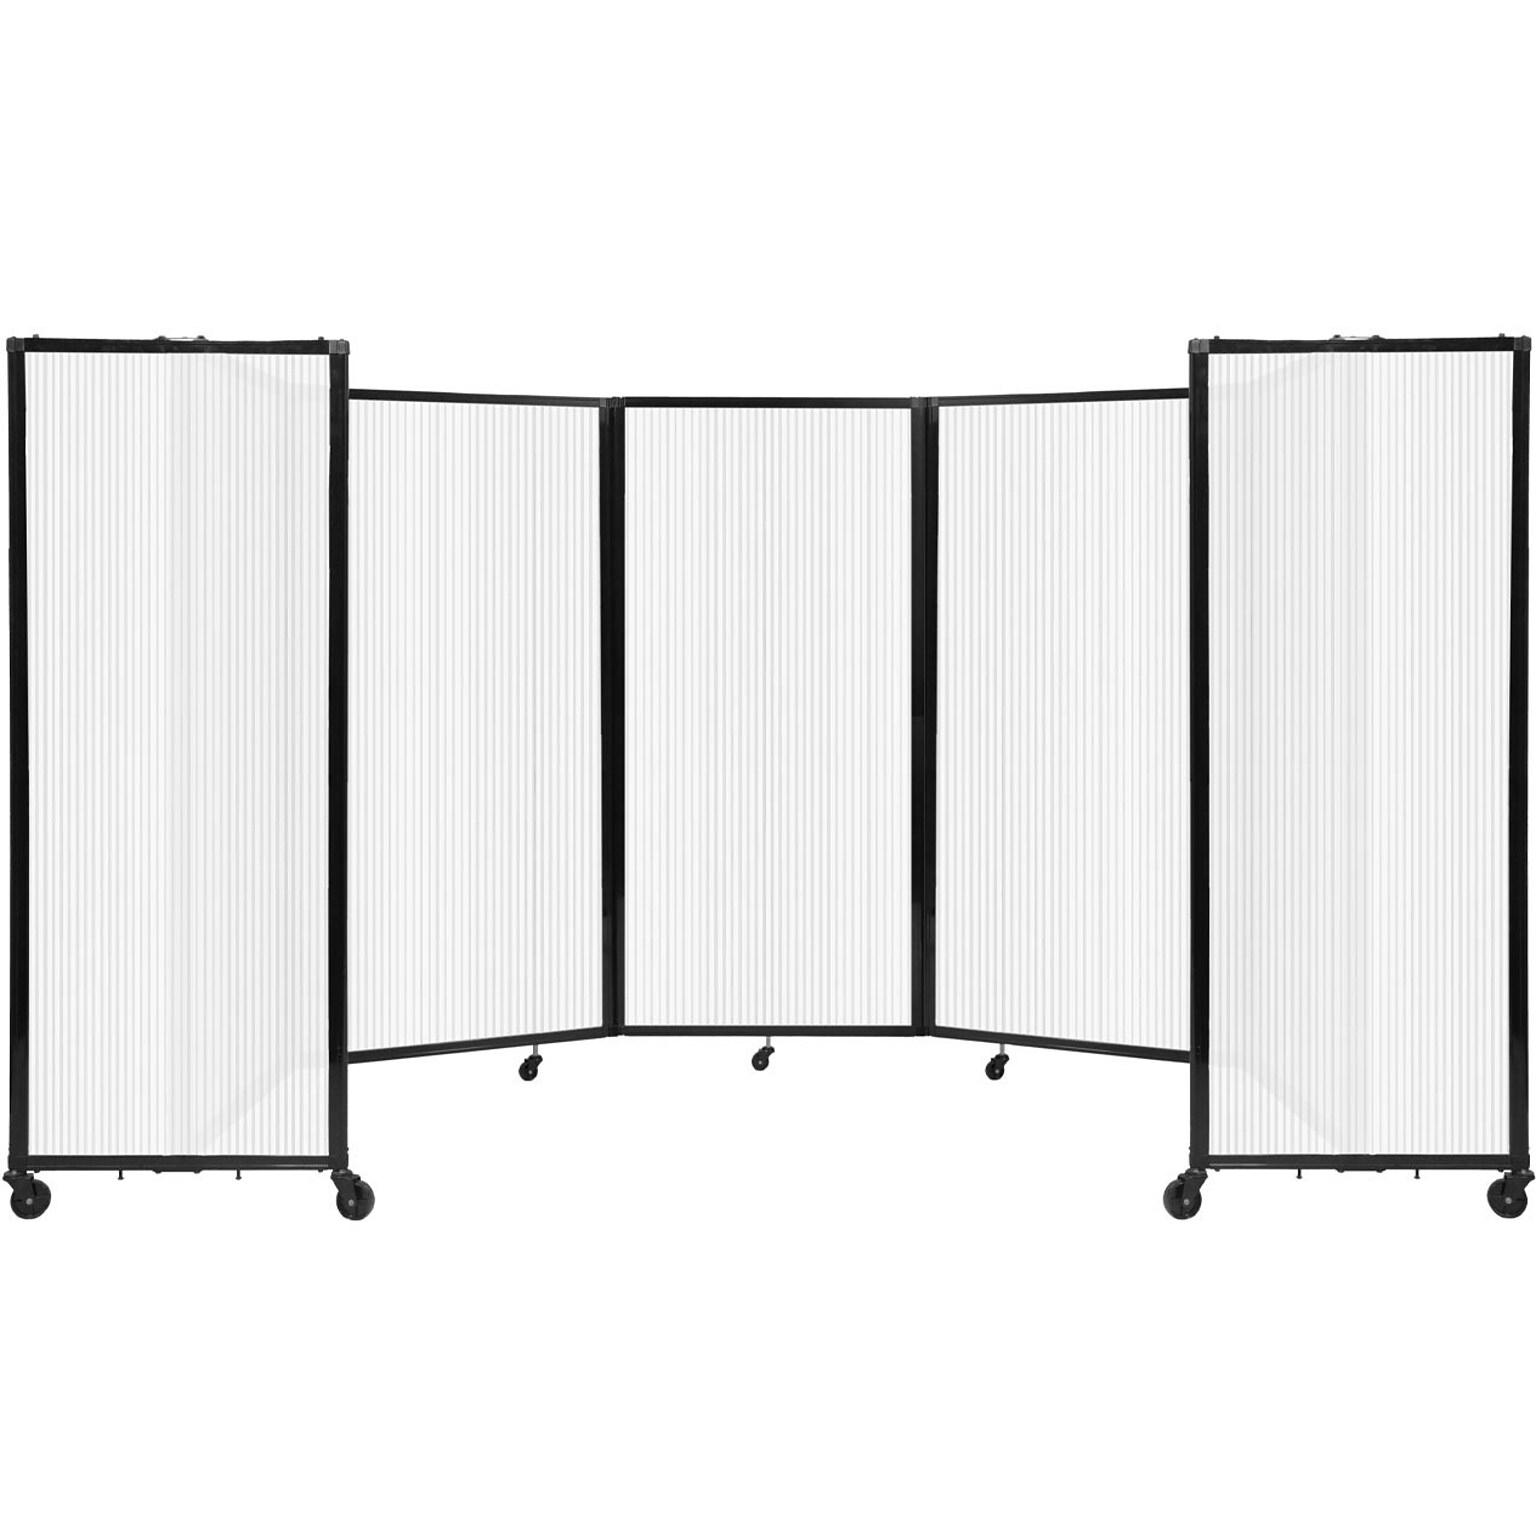 Versare The Room Divider 360 Freestanding Folding Portable Partition, 72H x 168W, Opal Fluted Polycarbonate (1272506)